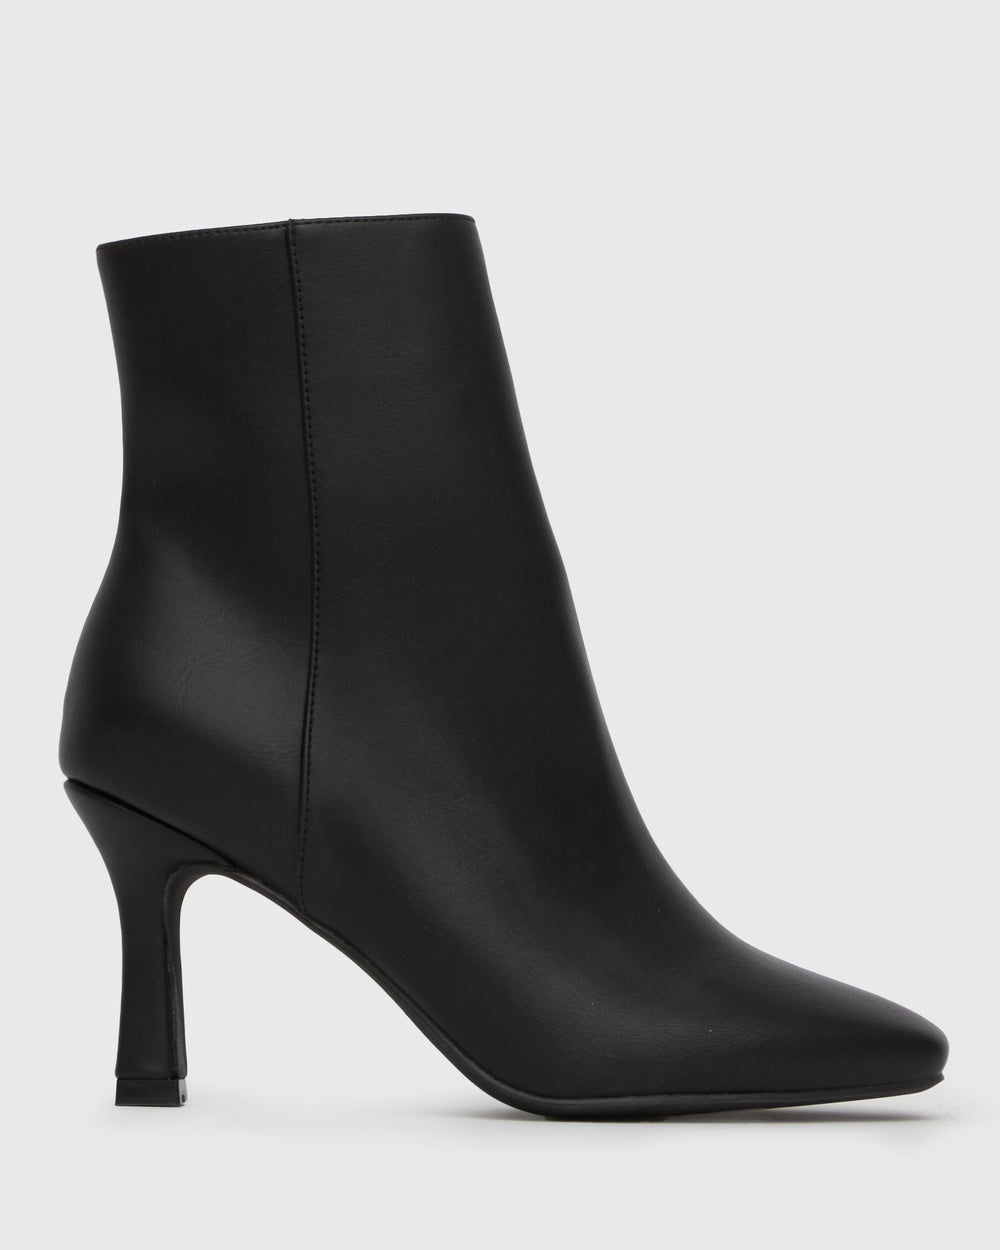 Ankle Boots to wear with dresses, pants and jeans